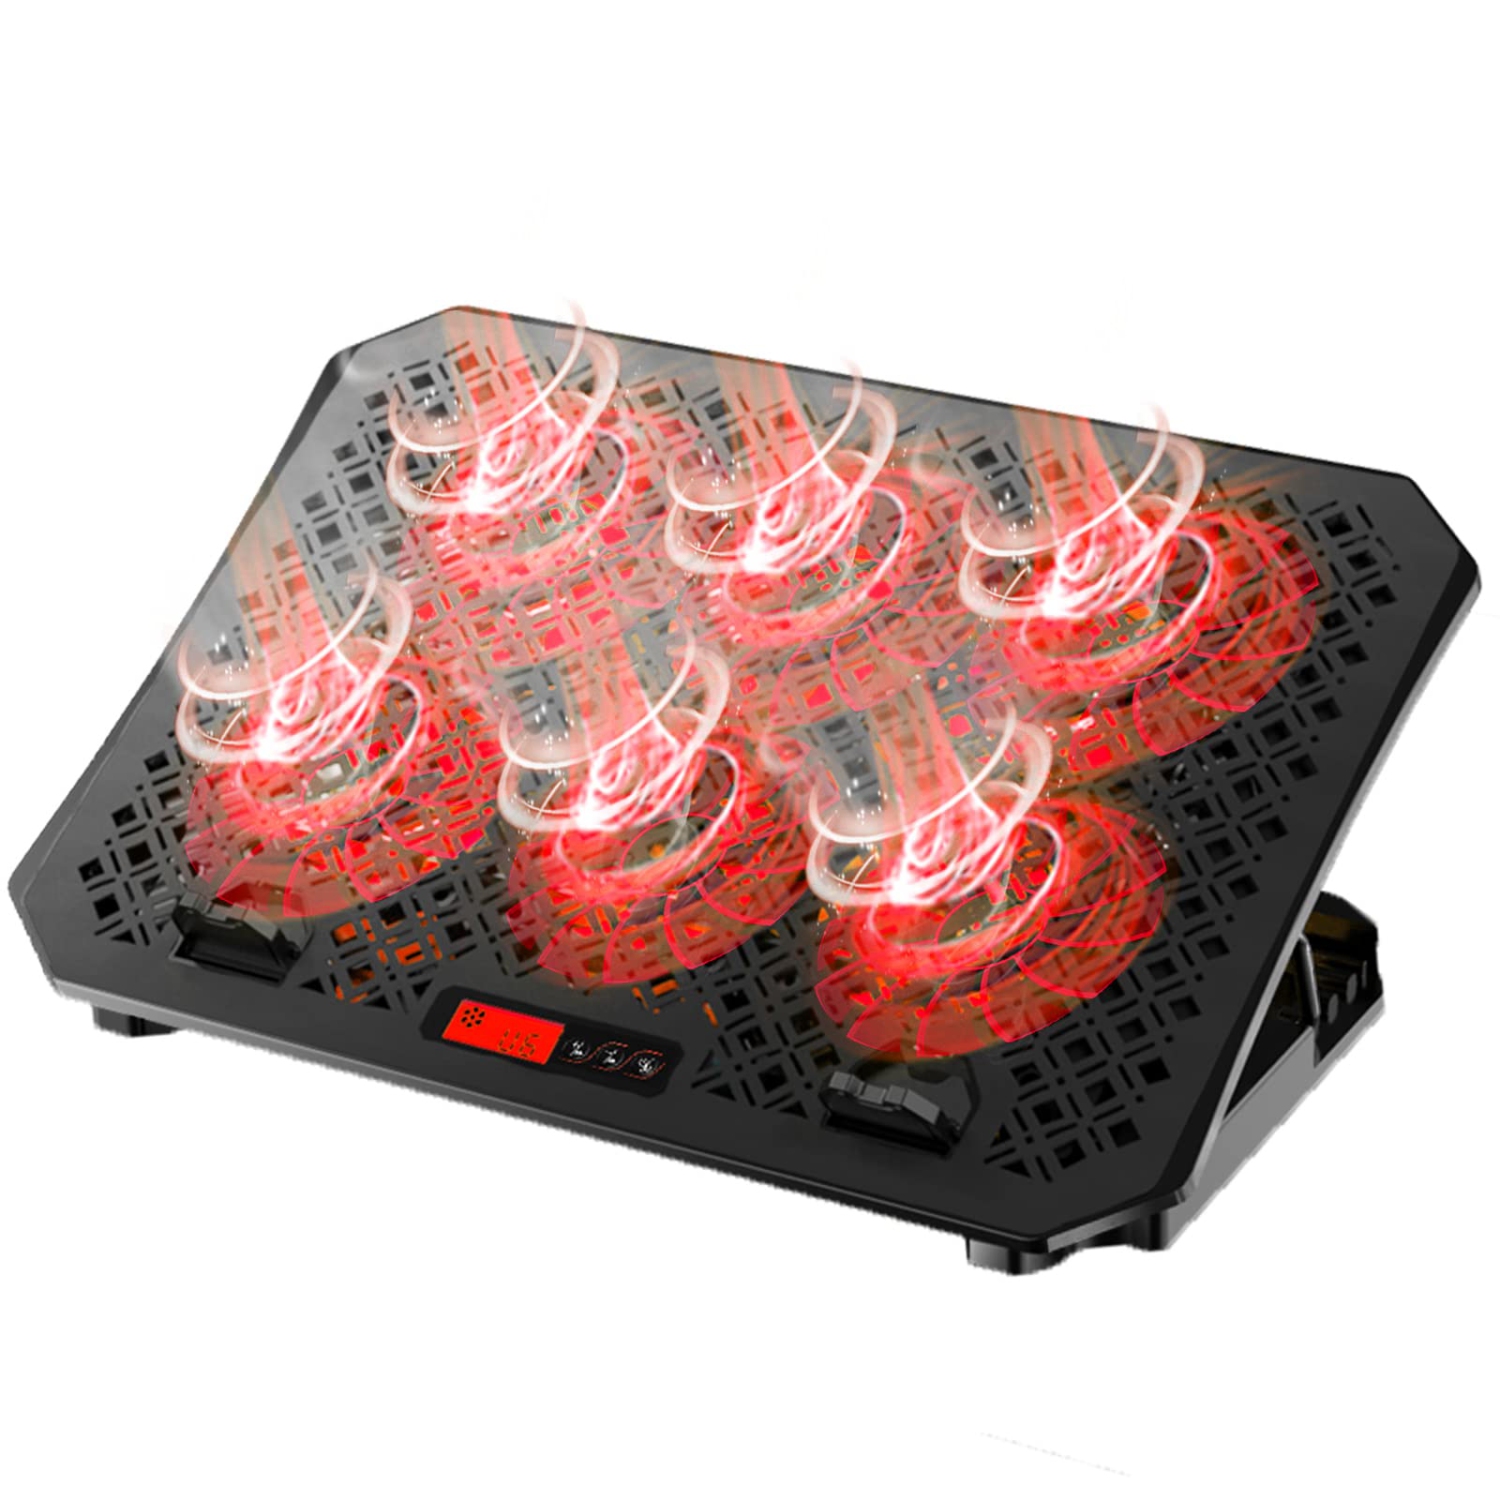 AICHESON Laptop Cooling Pad with 6 Cooler Fans with Red Lights, LCD Display, 2 USB Ports